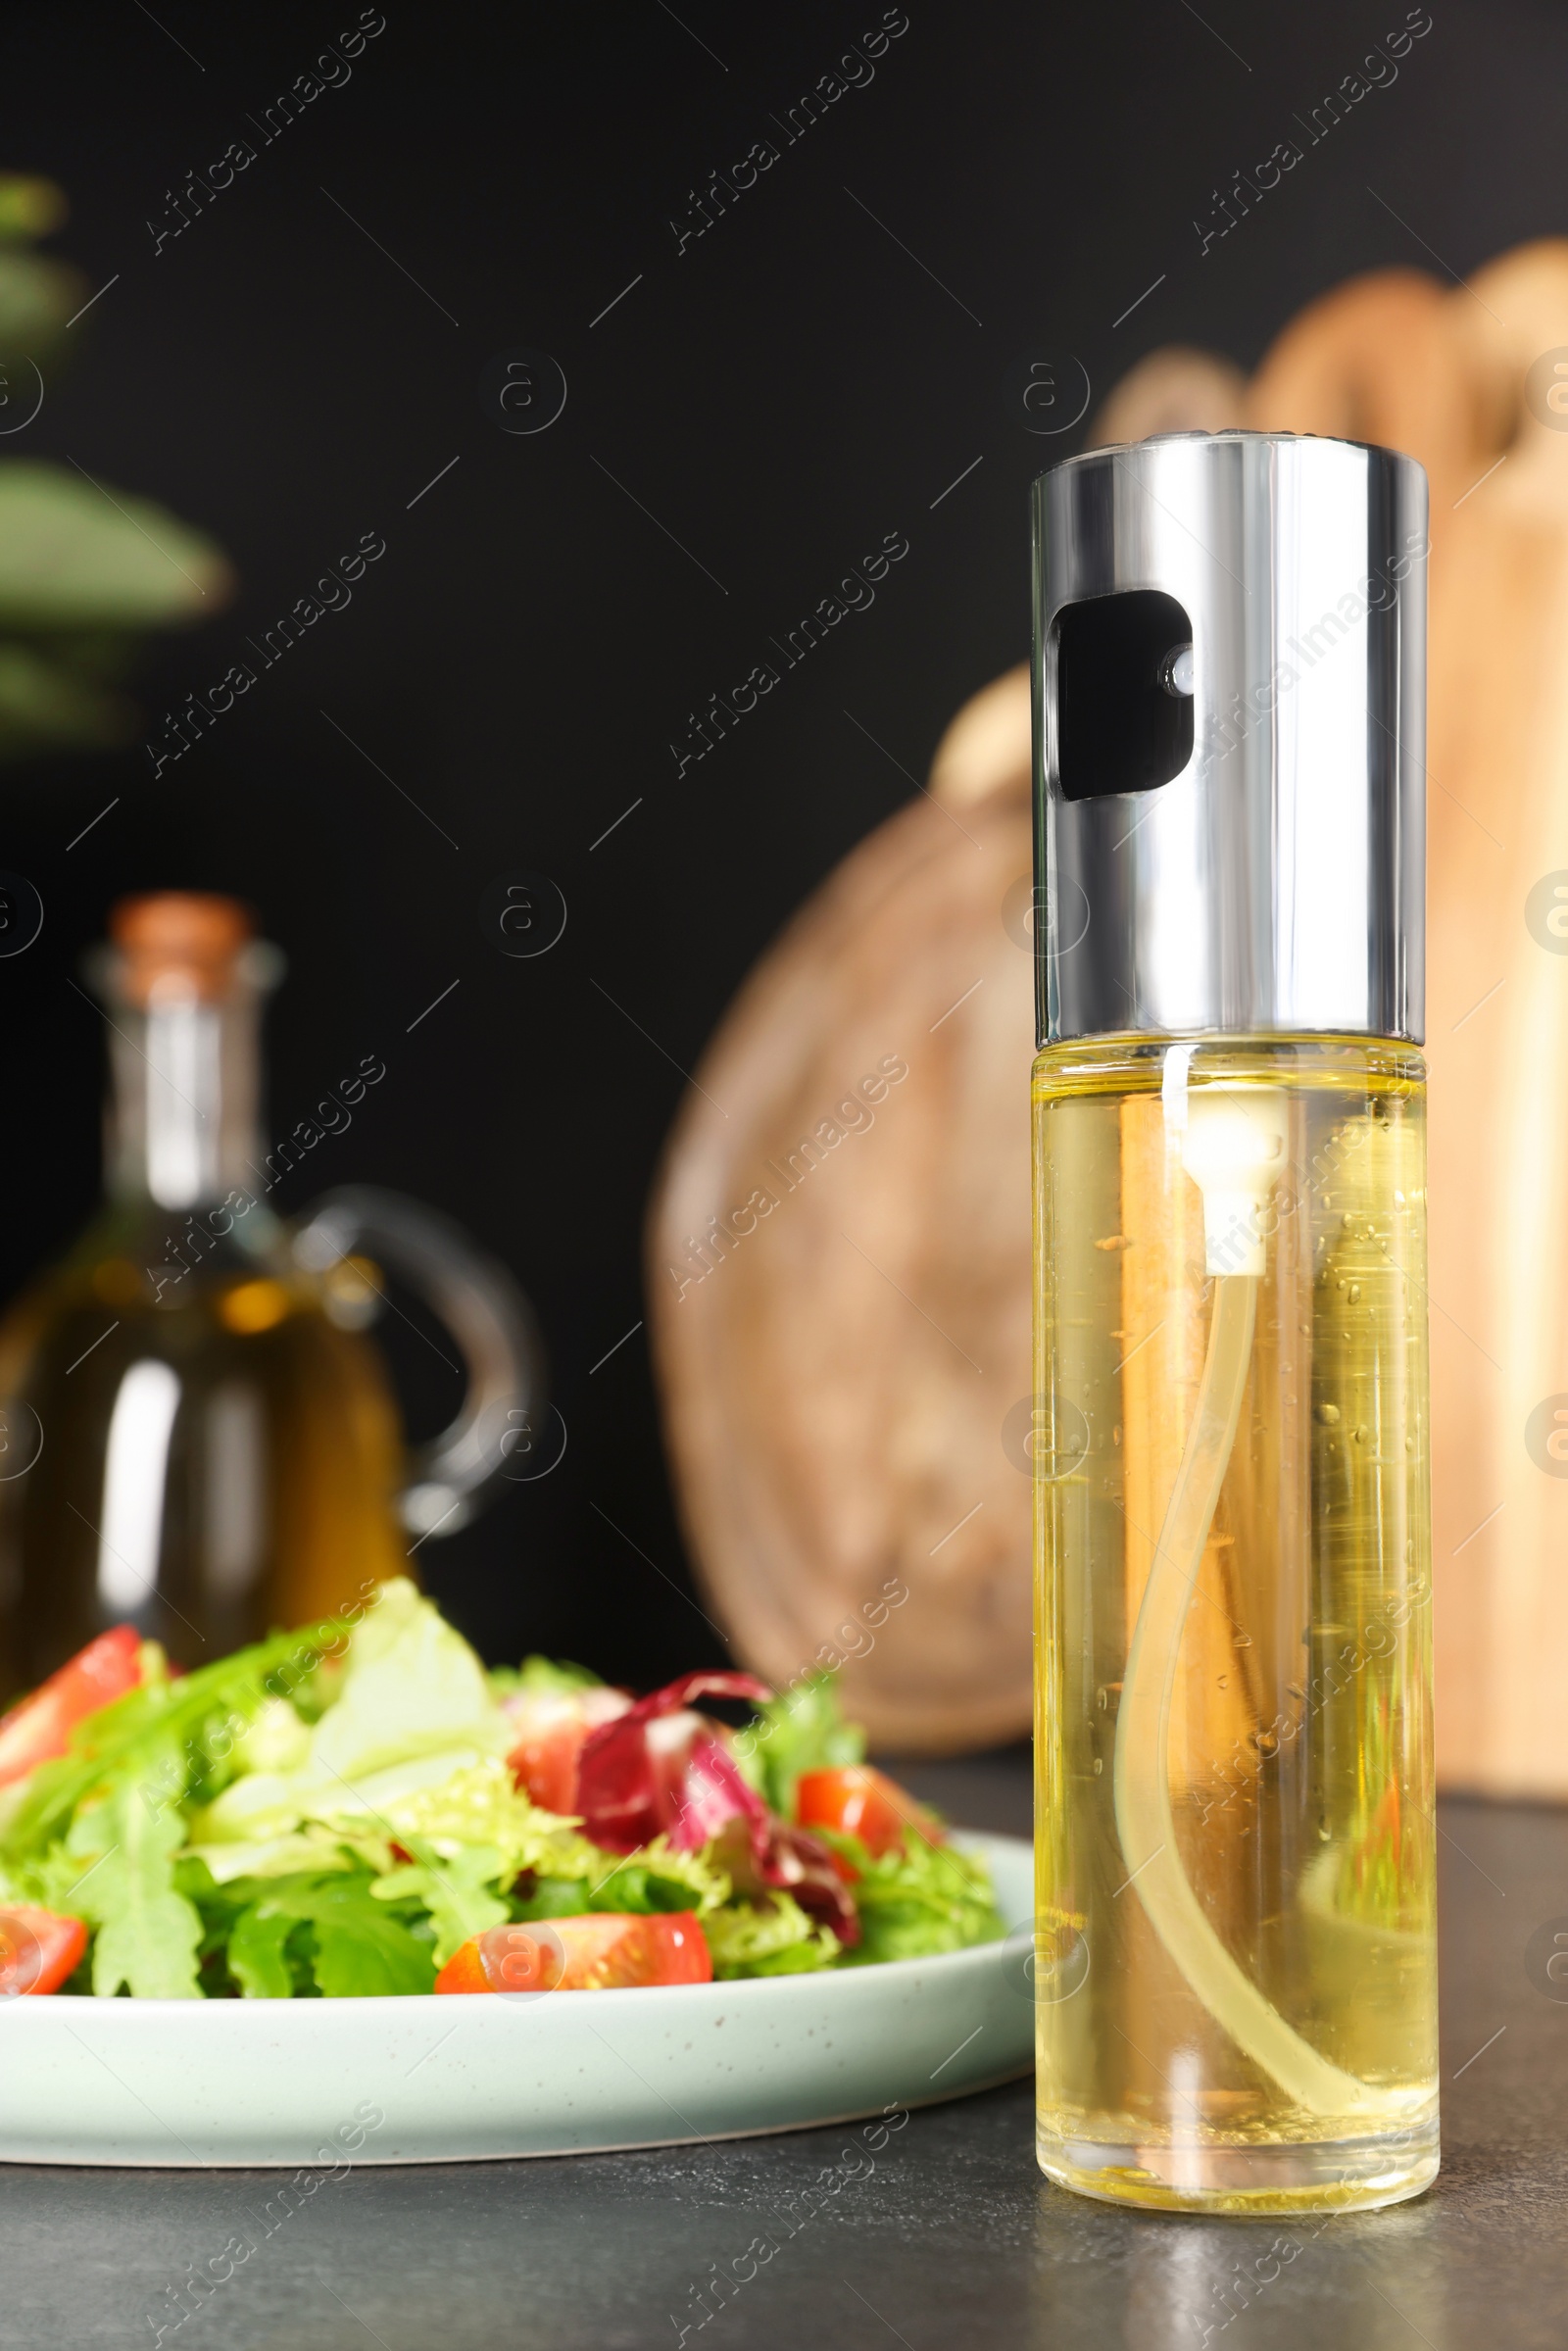 Photo of Plate of salad and spray bottle with cooking oil on black table in kitchen